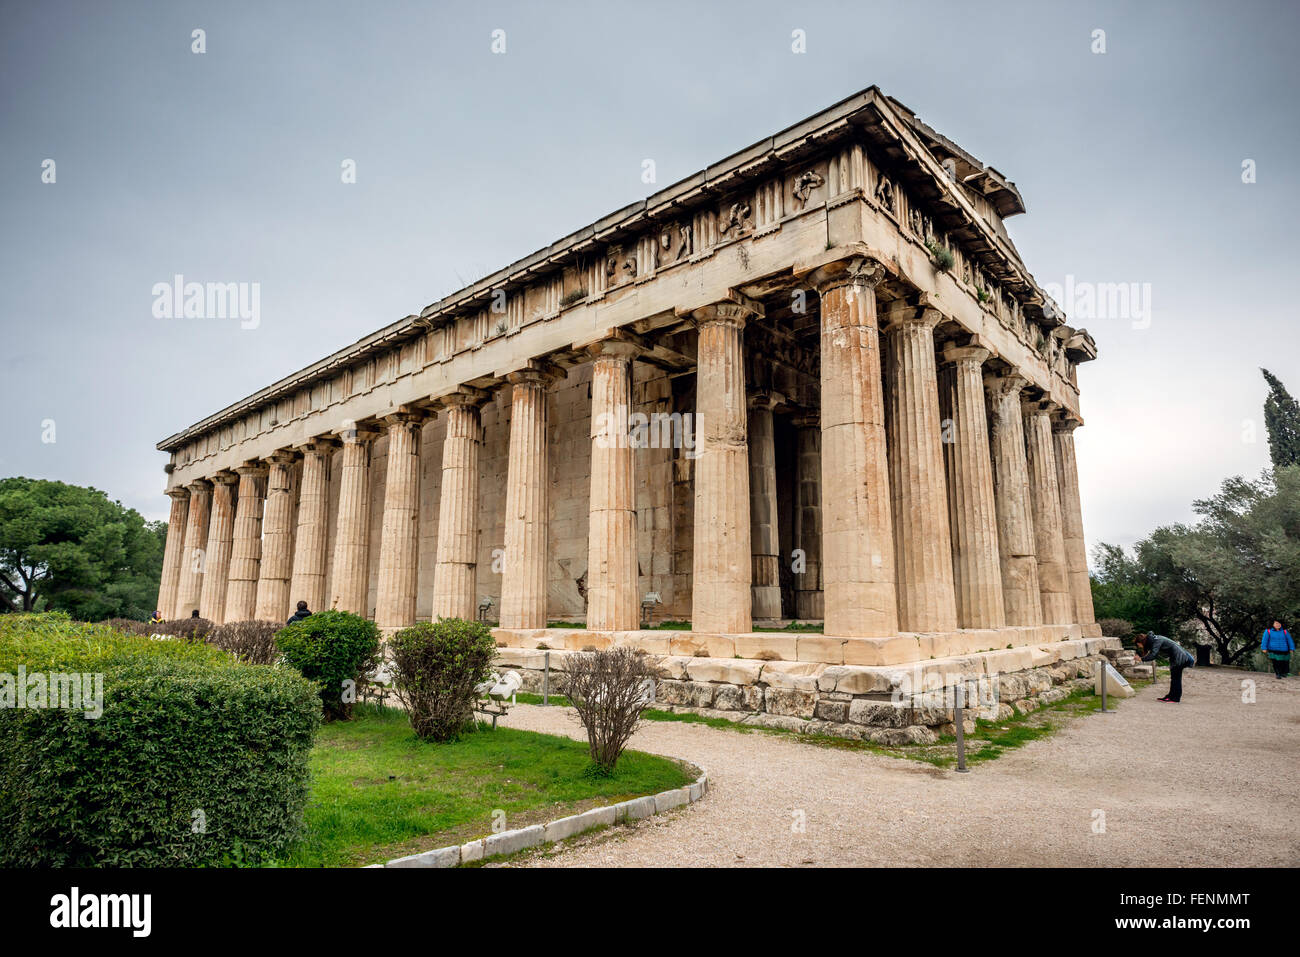 The Temple of Hephaestus, lying by the Ancient Agora of Athens Greece. Stock Photo